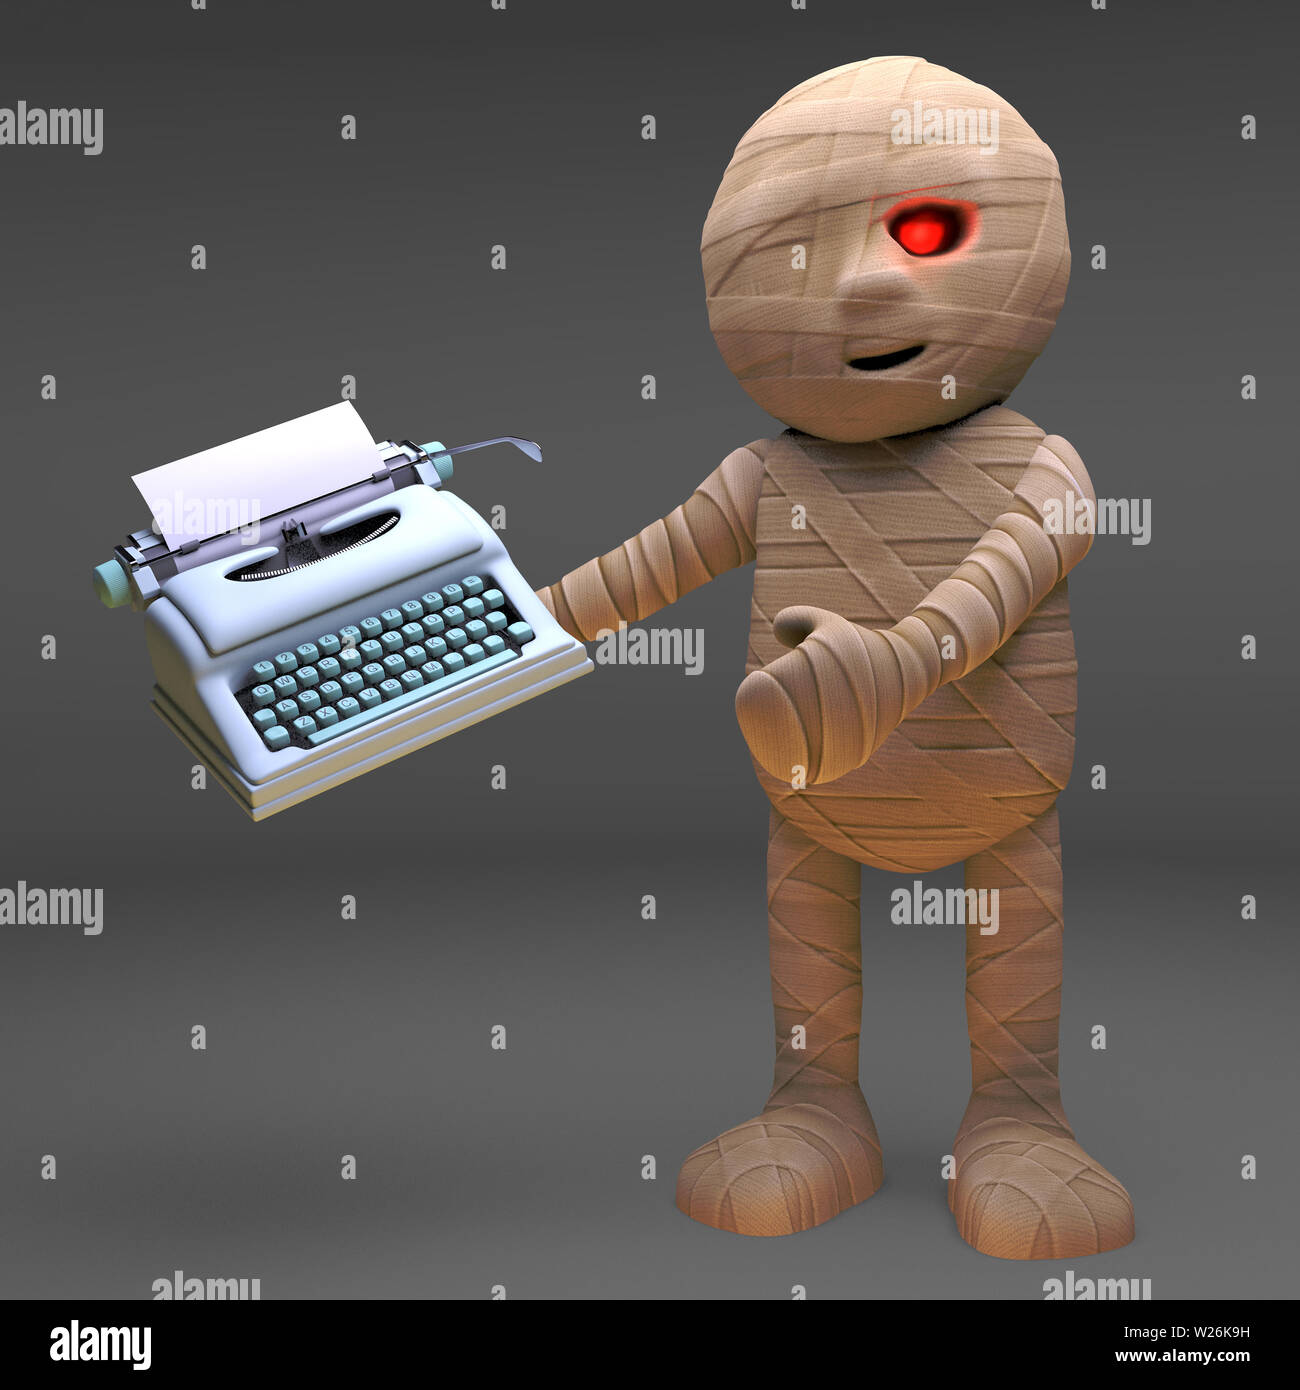 Zombie monster has bought a typewriter, 3d illustration render Stock Photo